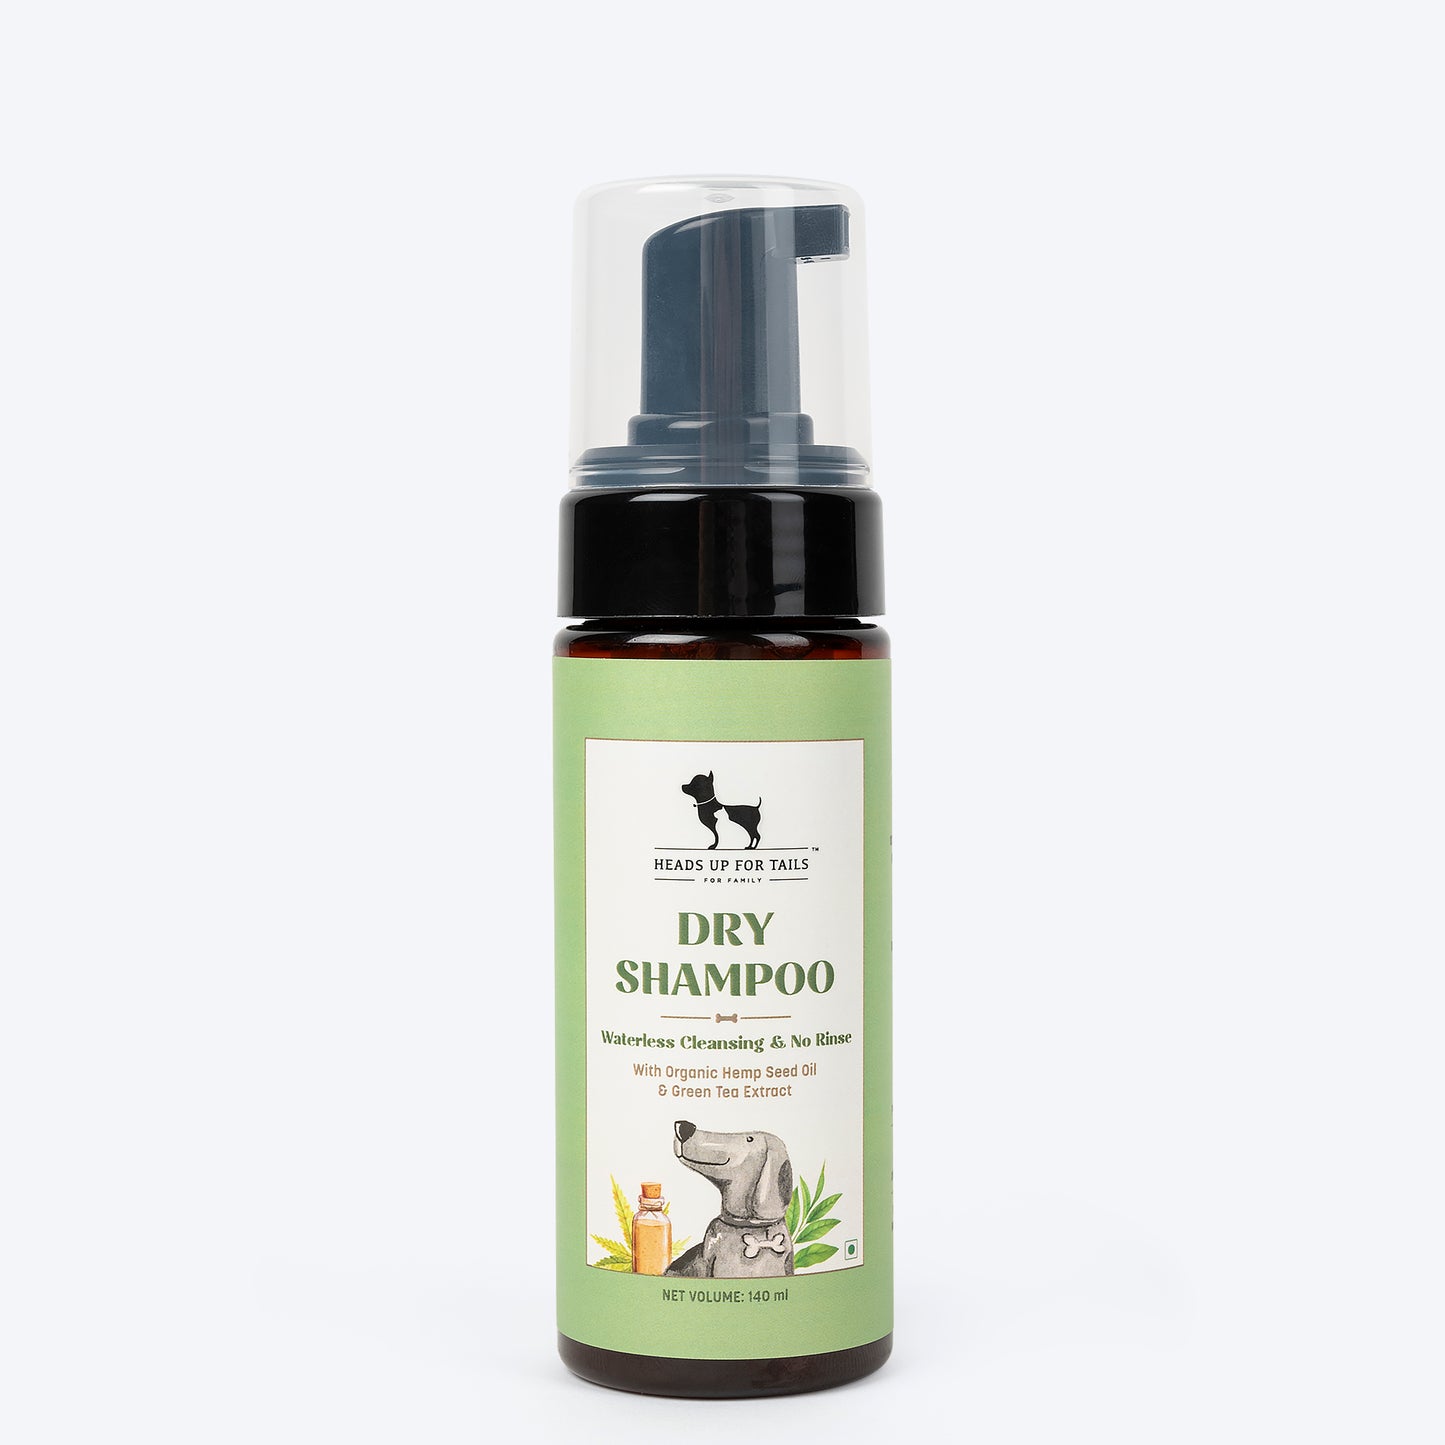 HUFT Waterless Cleansing & No Rinse Dry Shampoo For Dogs - 140 ml - Heads Up For Tails